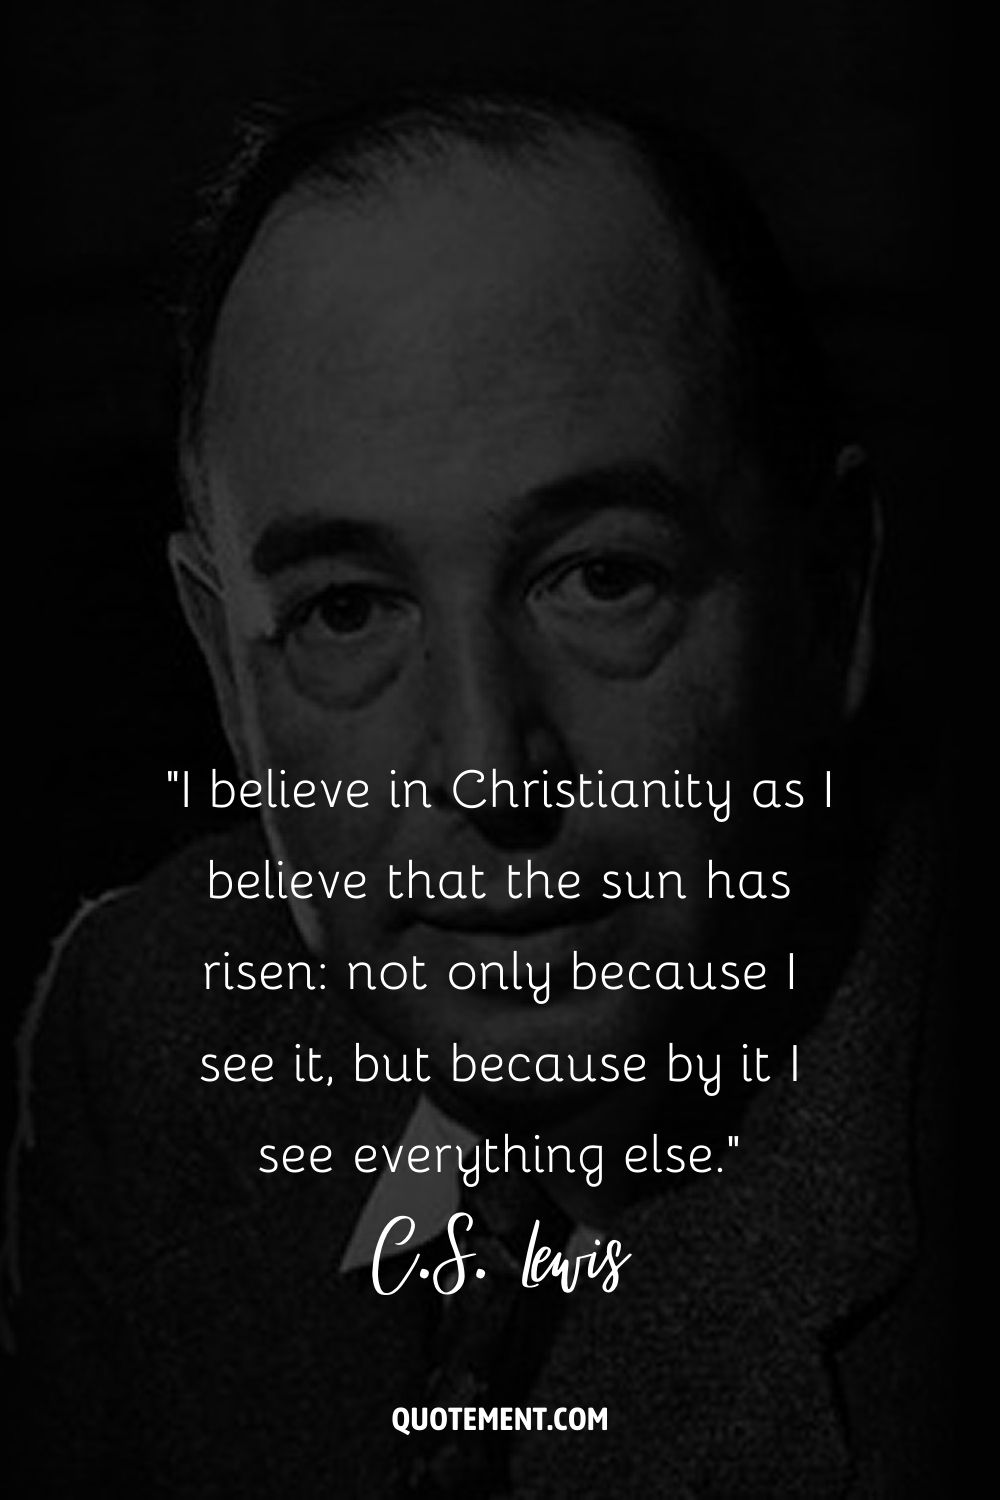 C.S. Lewis epitomizes timeless elegance in this classic portrait